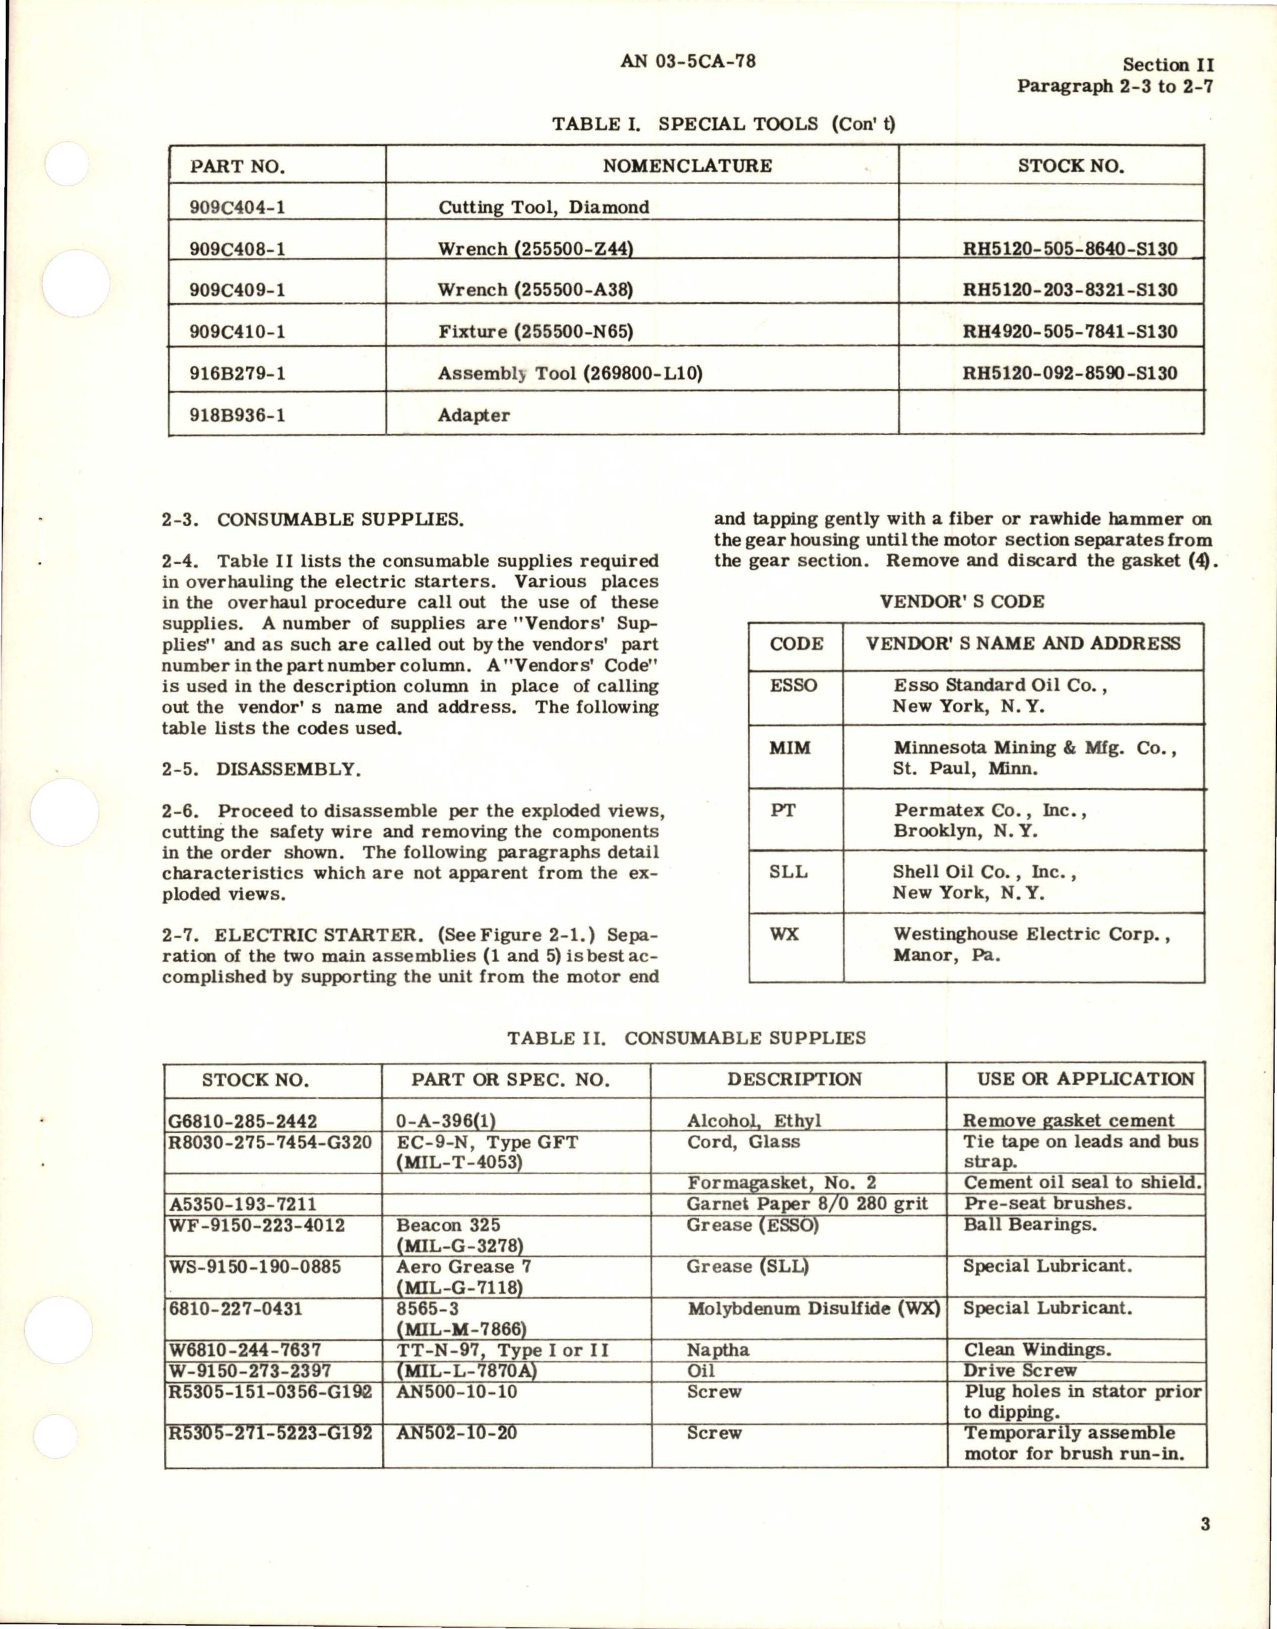 Sample page 5 from AirCorps Library document: Overhaul Instructions for Electric Starters (for Gas Turbine Engines) Models A28A8544, and A28A8544A